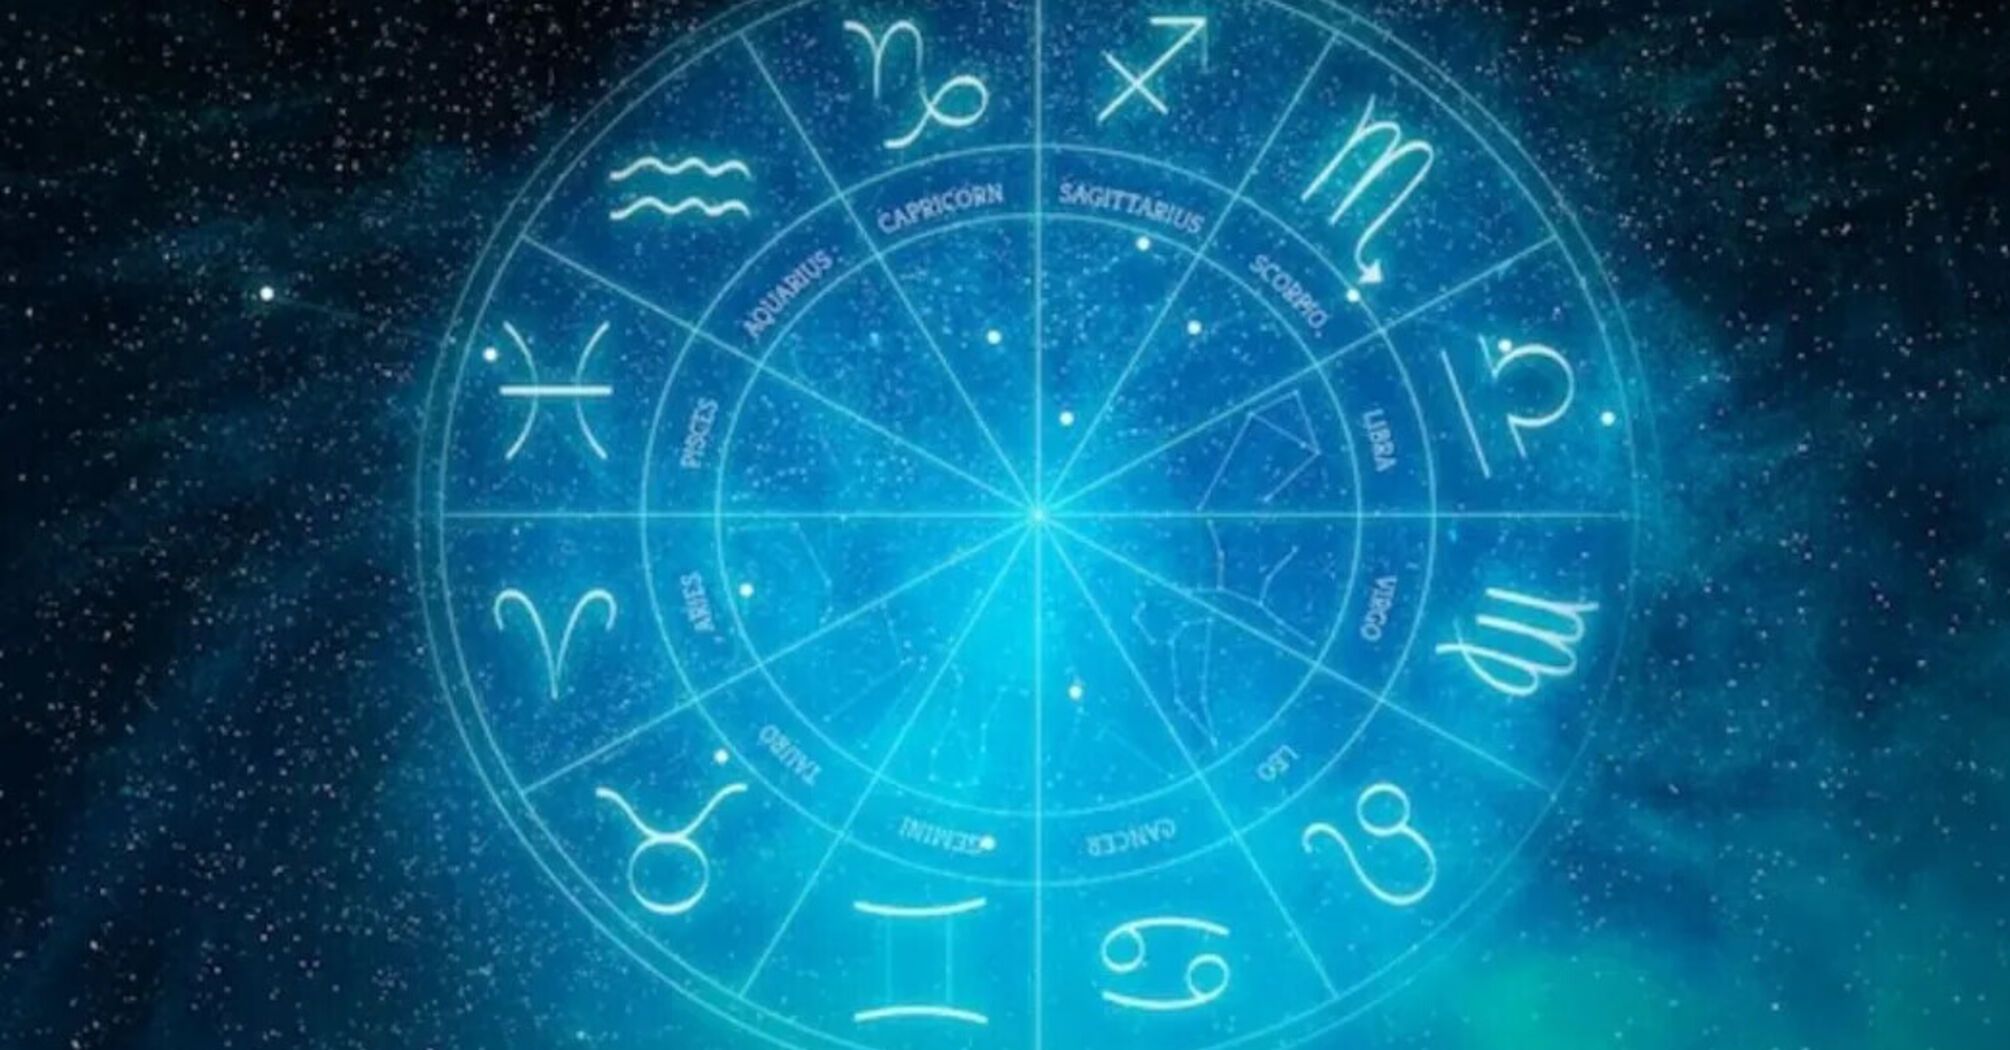 Representatives of the five zodiac signs will meet new friends this month